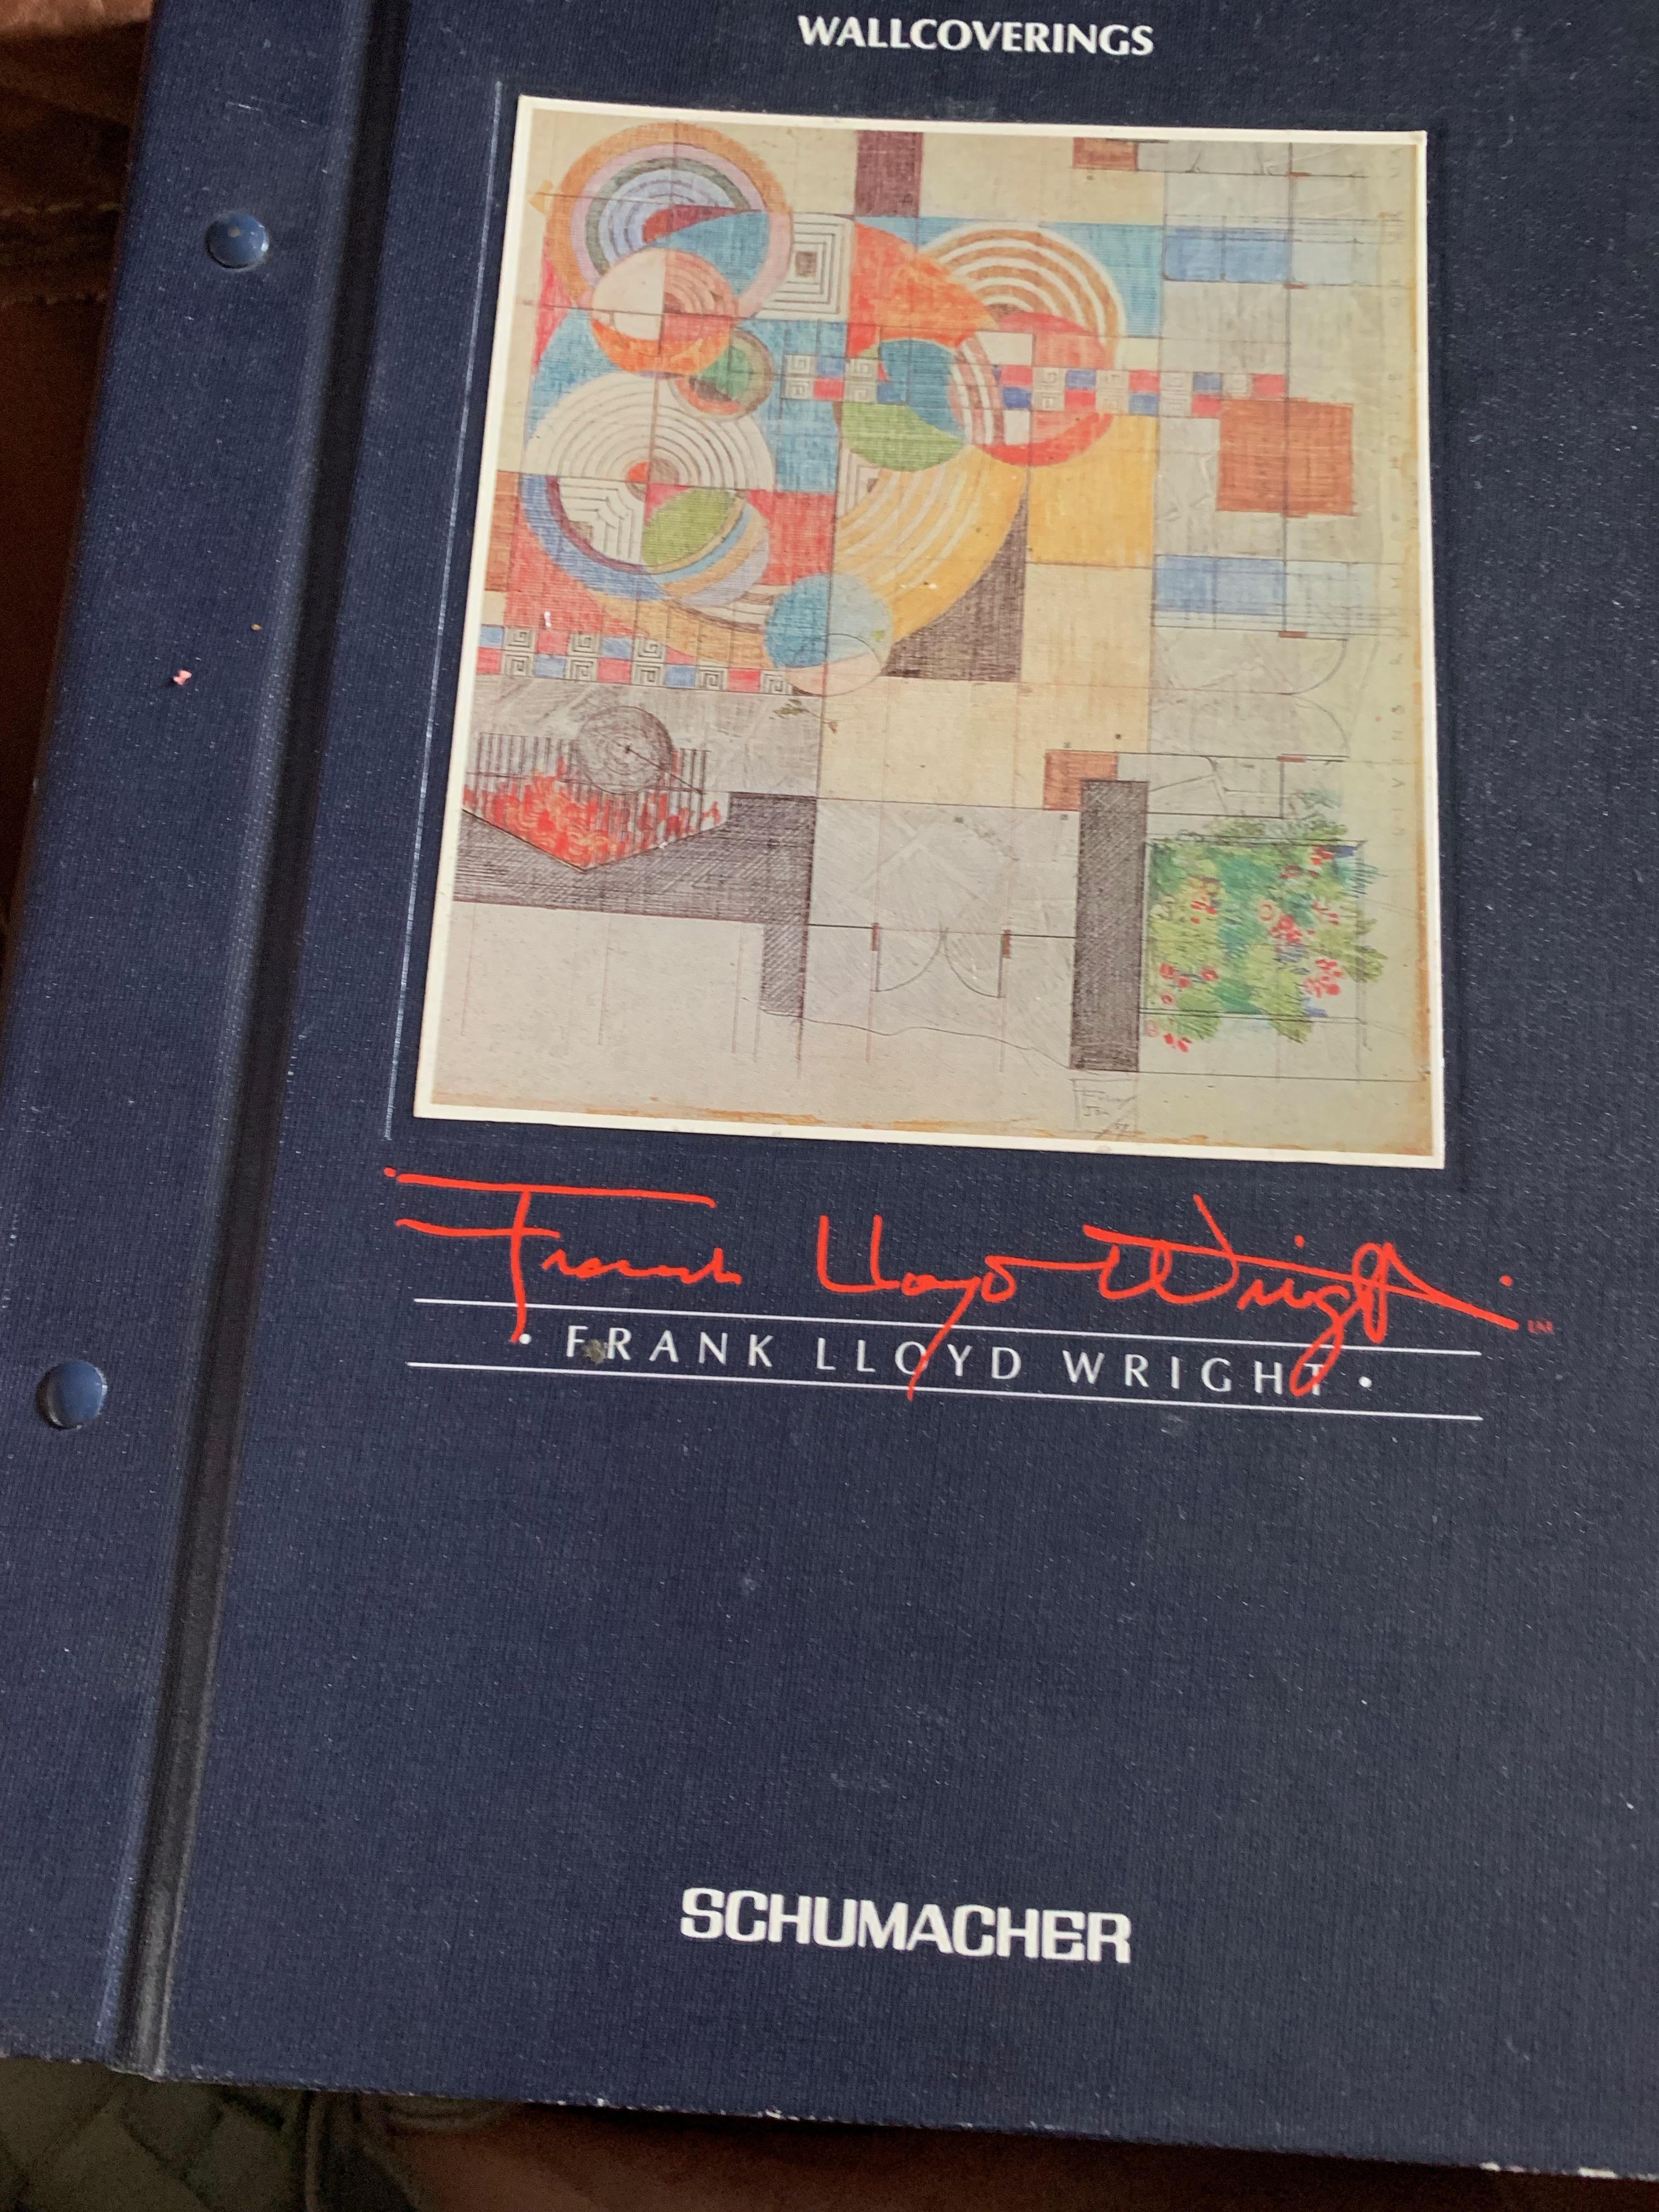 Mission Frank Lloyd Wright Schumacher Wallcoverings & Woven Catalogue Reference Set 1986 For Sale